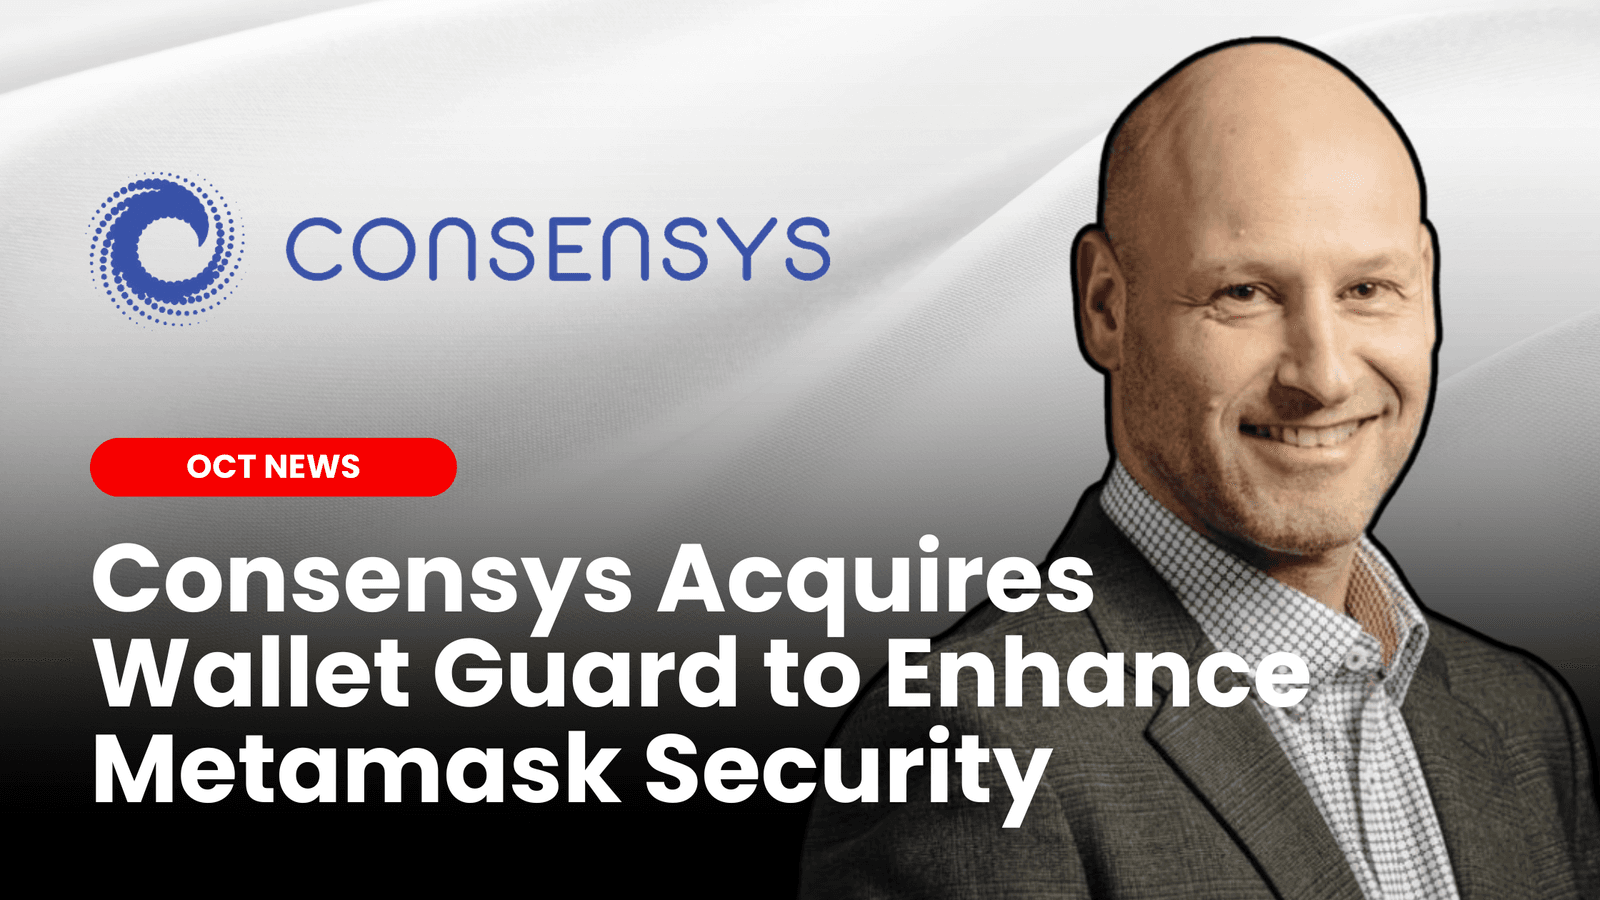 Consensys Acquires Wallet Guard to Enhance Metamask Security image